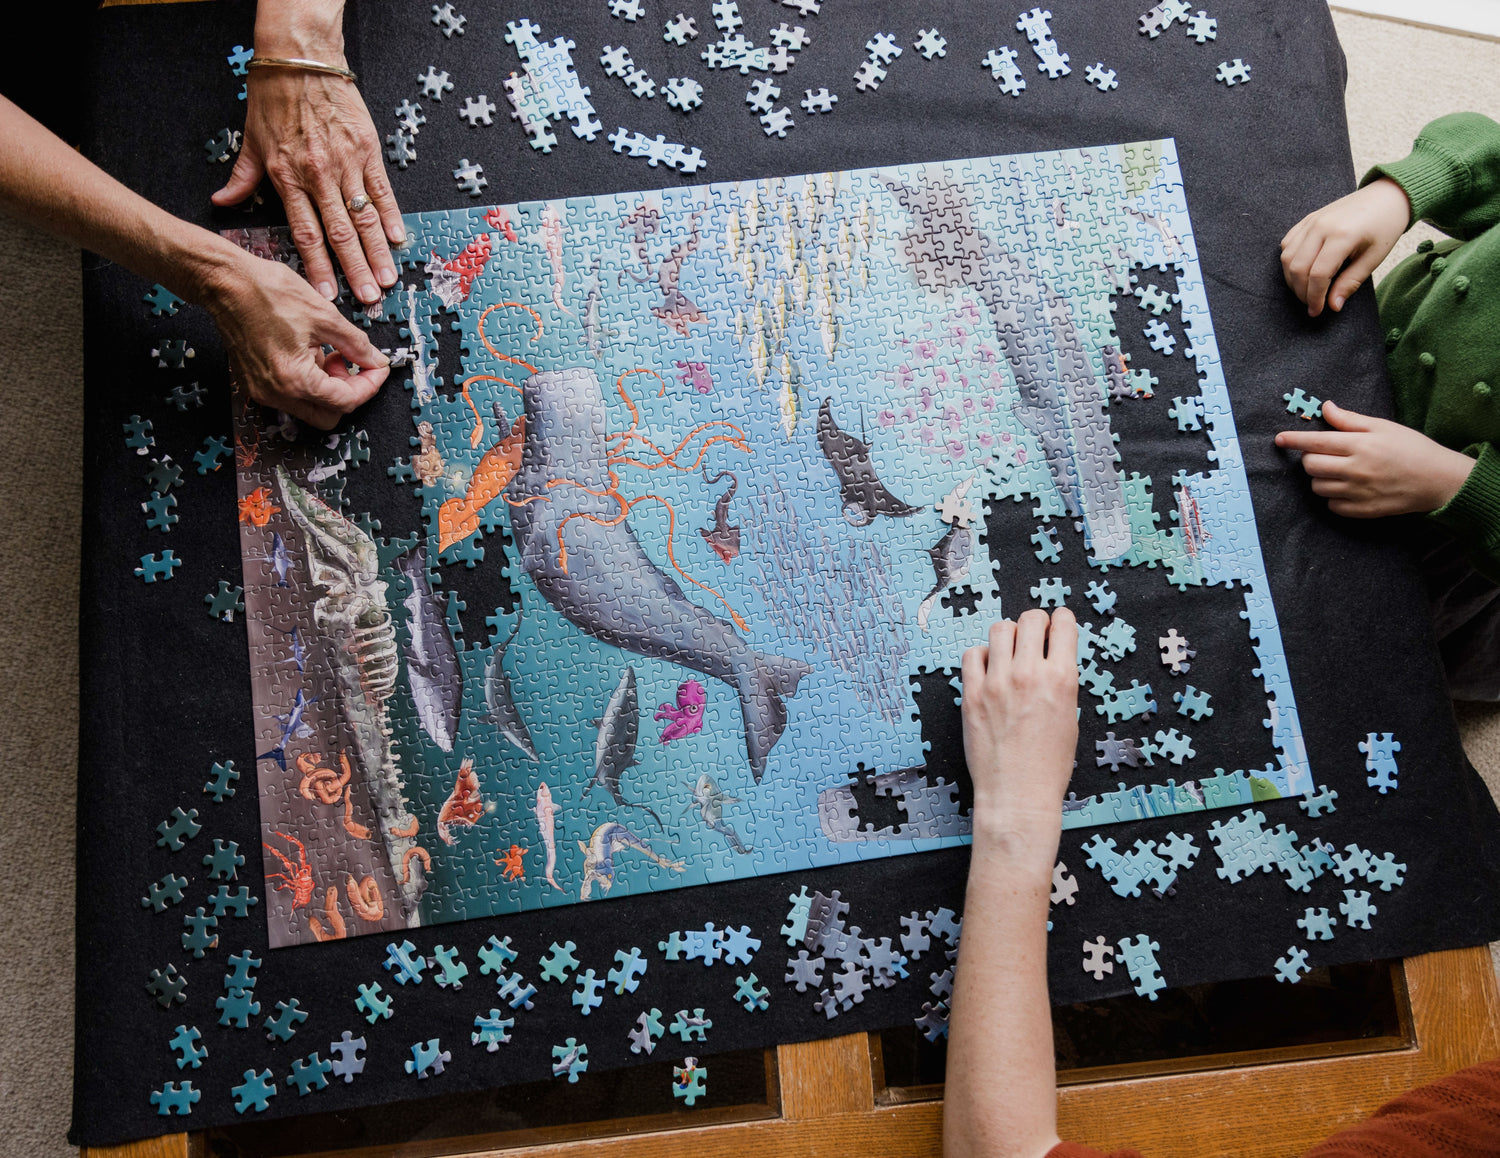 A bird's-eye view of the Whale Poo and CO2 puzzle on a coffee table. The puzzle is partially completed and the hands of three people are show completing the puzzle. One is a elderly women, one is a woman and one is a young girl.